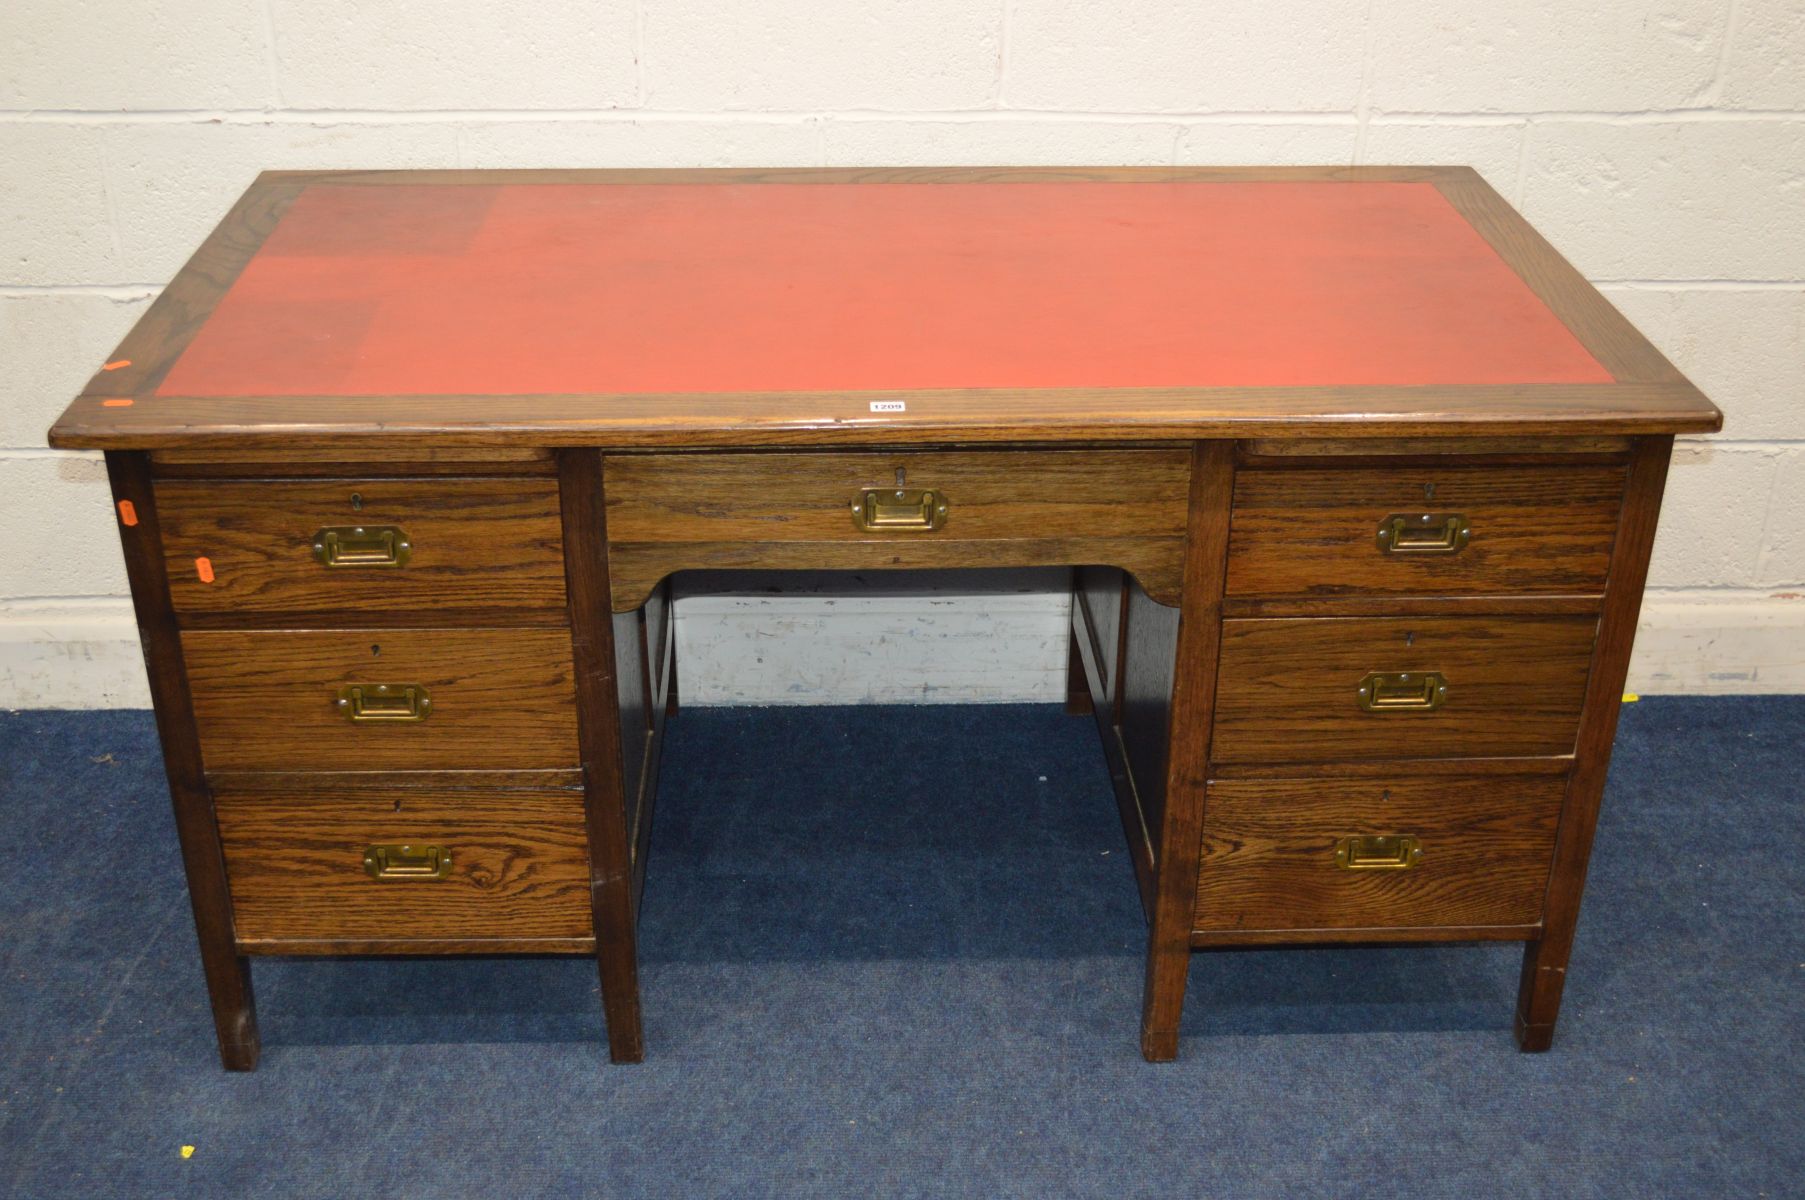 A MID 20TH CENTURY STAINED OAK KNEE HOLE DESK, with a red leather top and seven drawers with brass